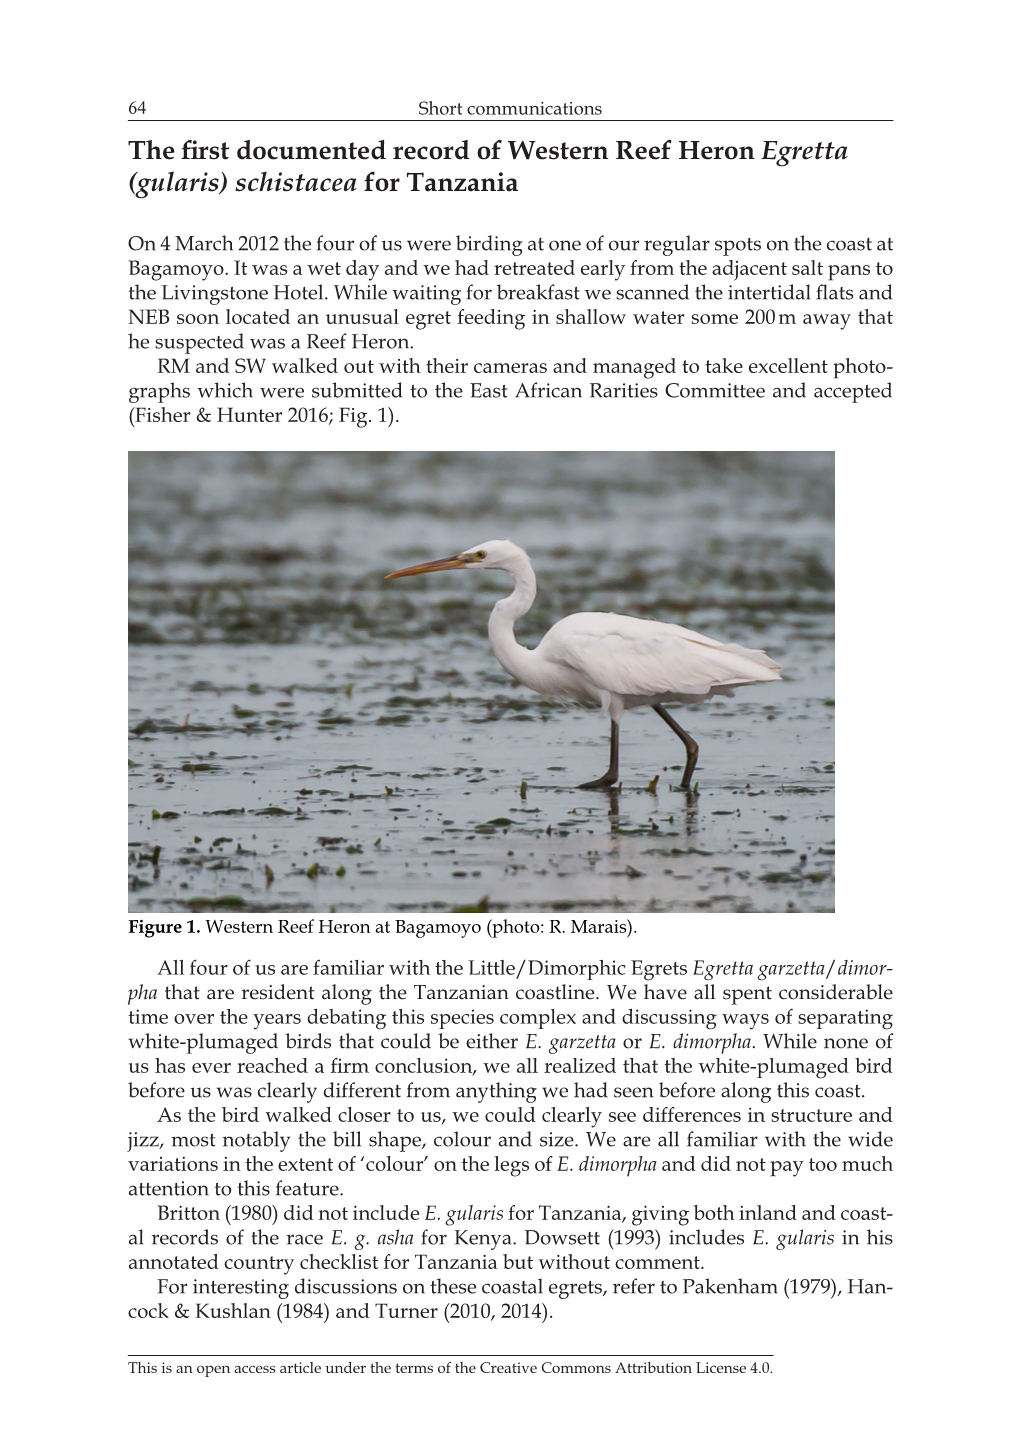 The First Documented Record of Western Reef Heron Egretta (Gularis) Schistacea for Tanzania